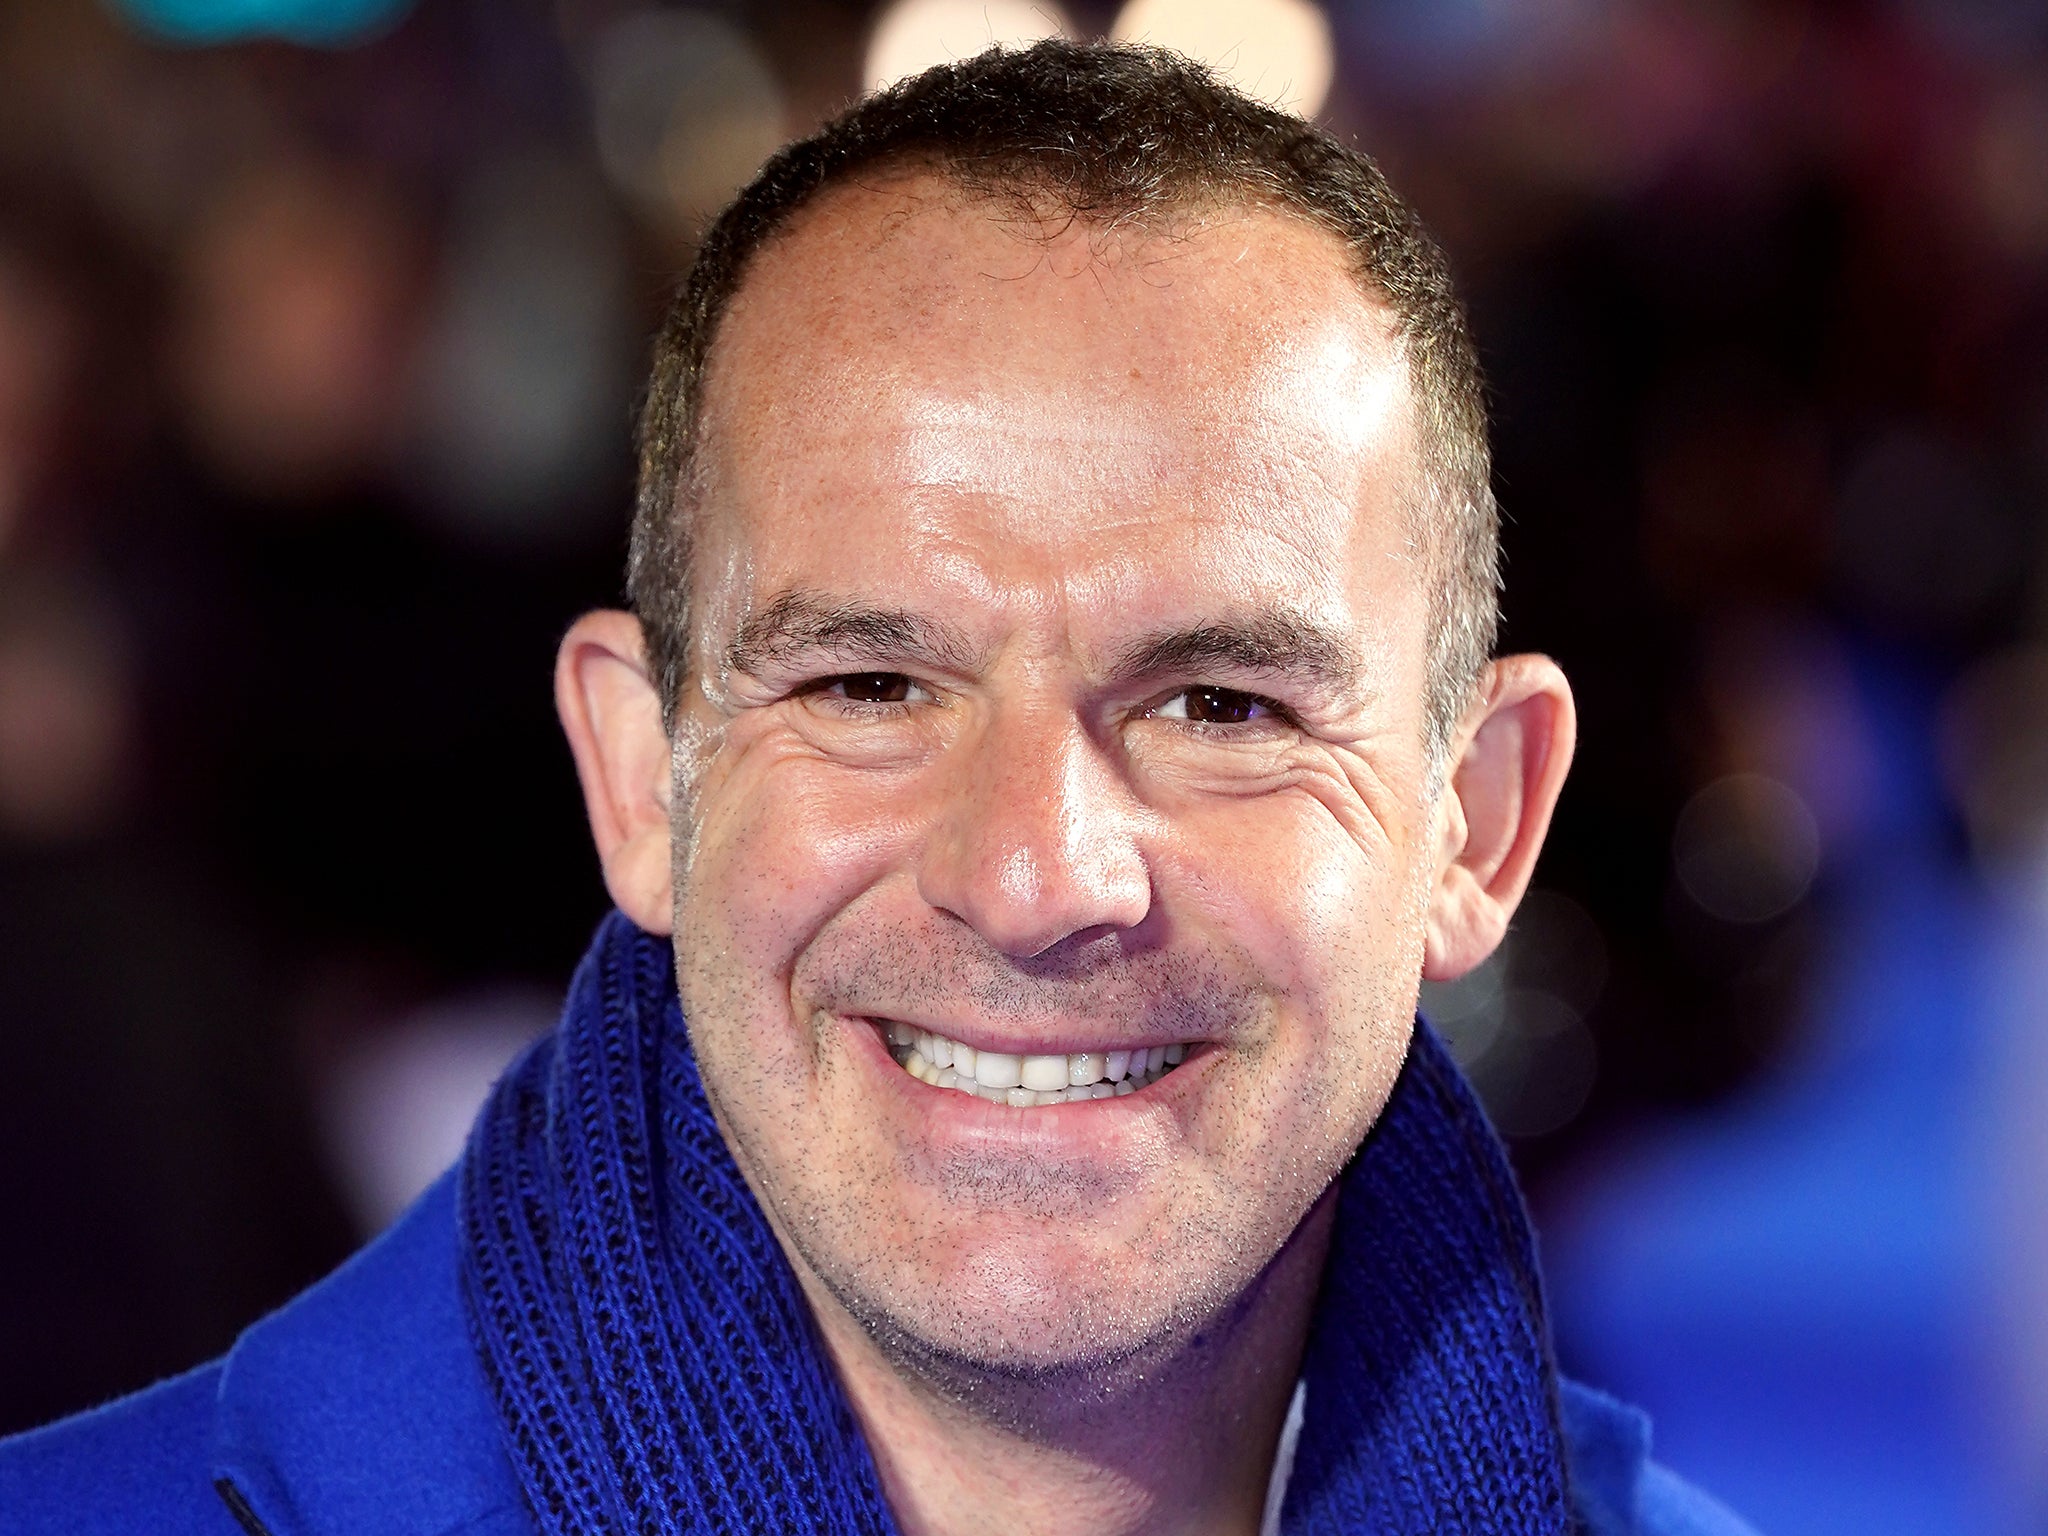 Martin Lewis said January’s changes are ‘mostly irrelevant’